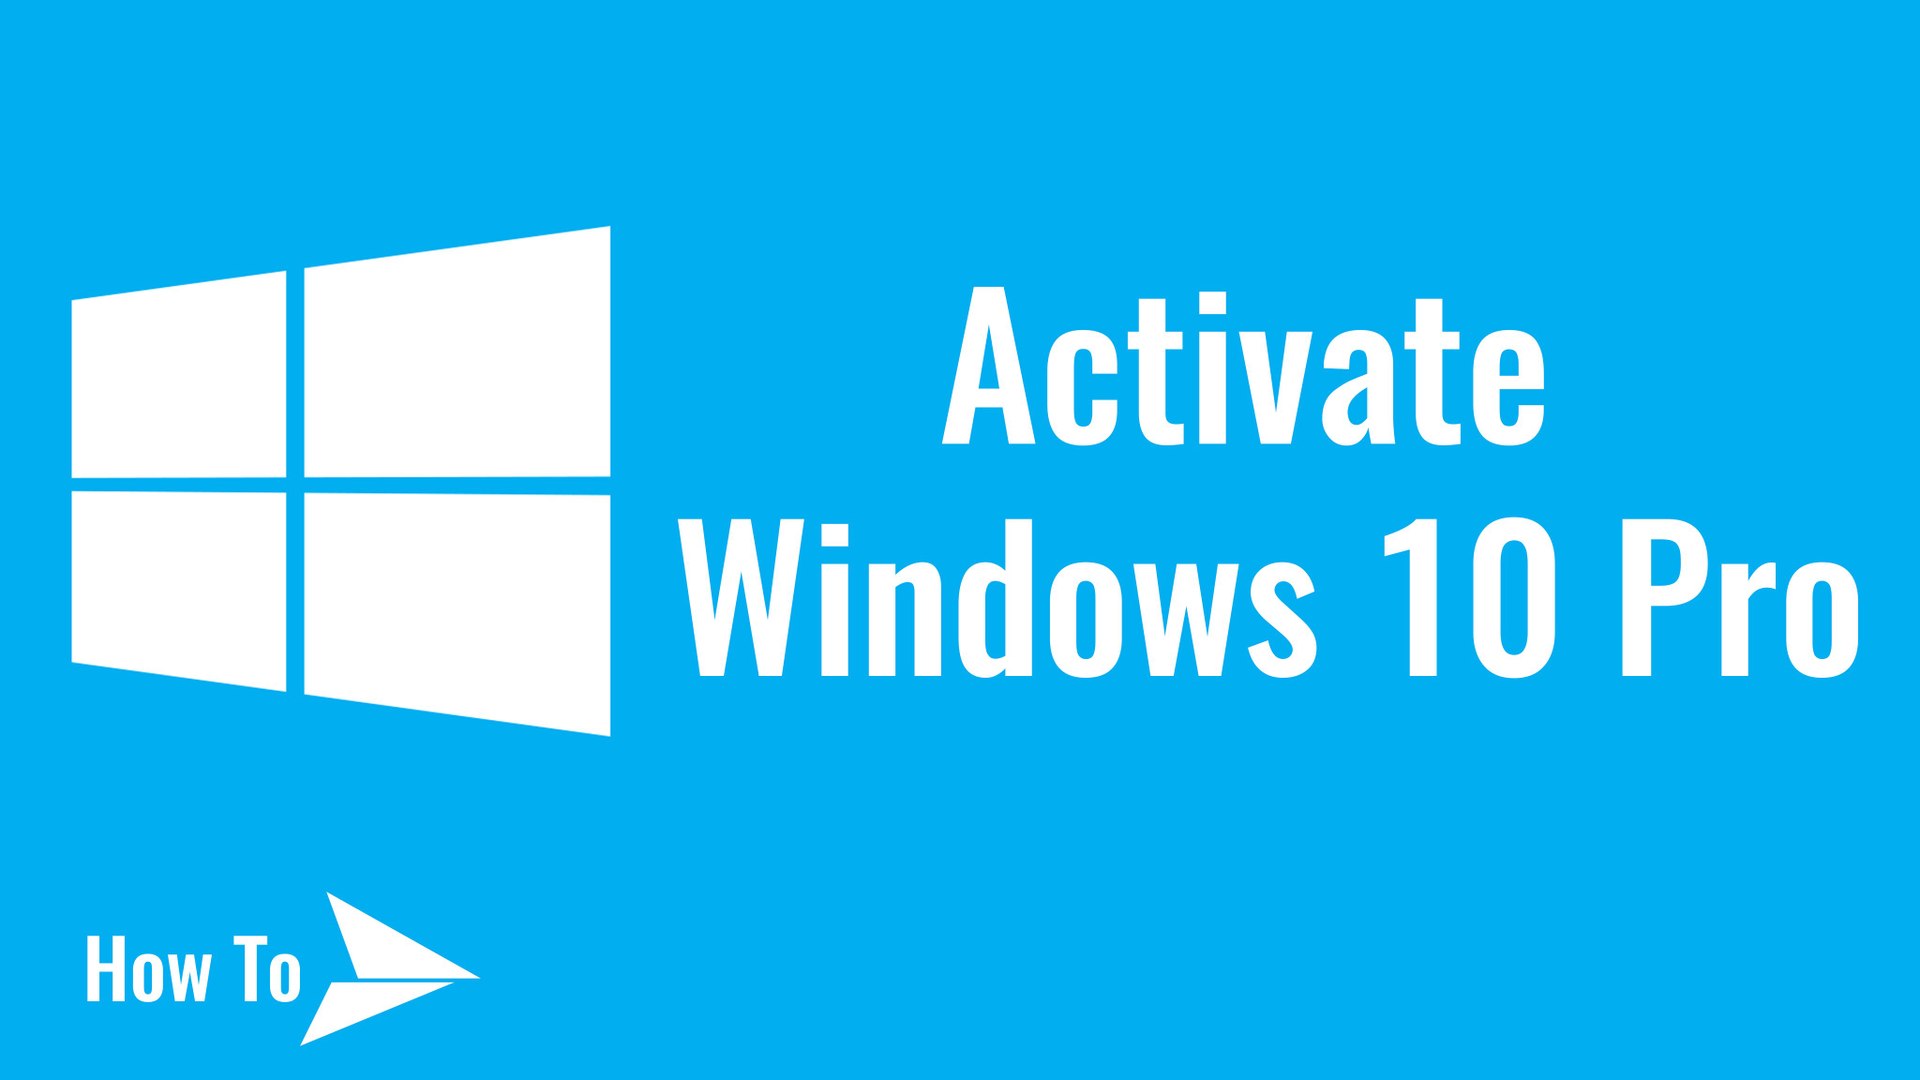 how to activate windows 10 pro with windows 7 key